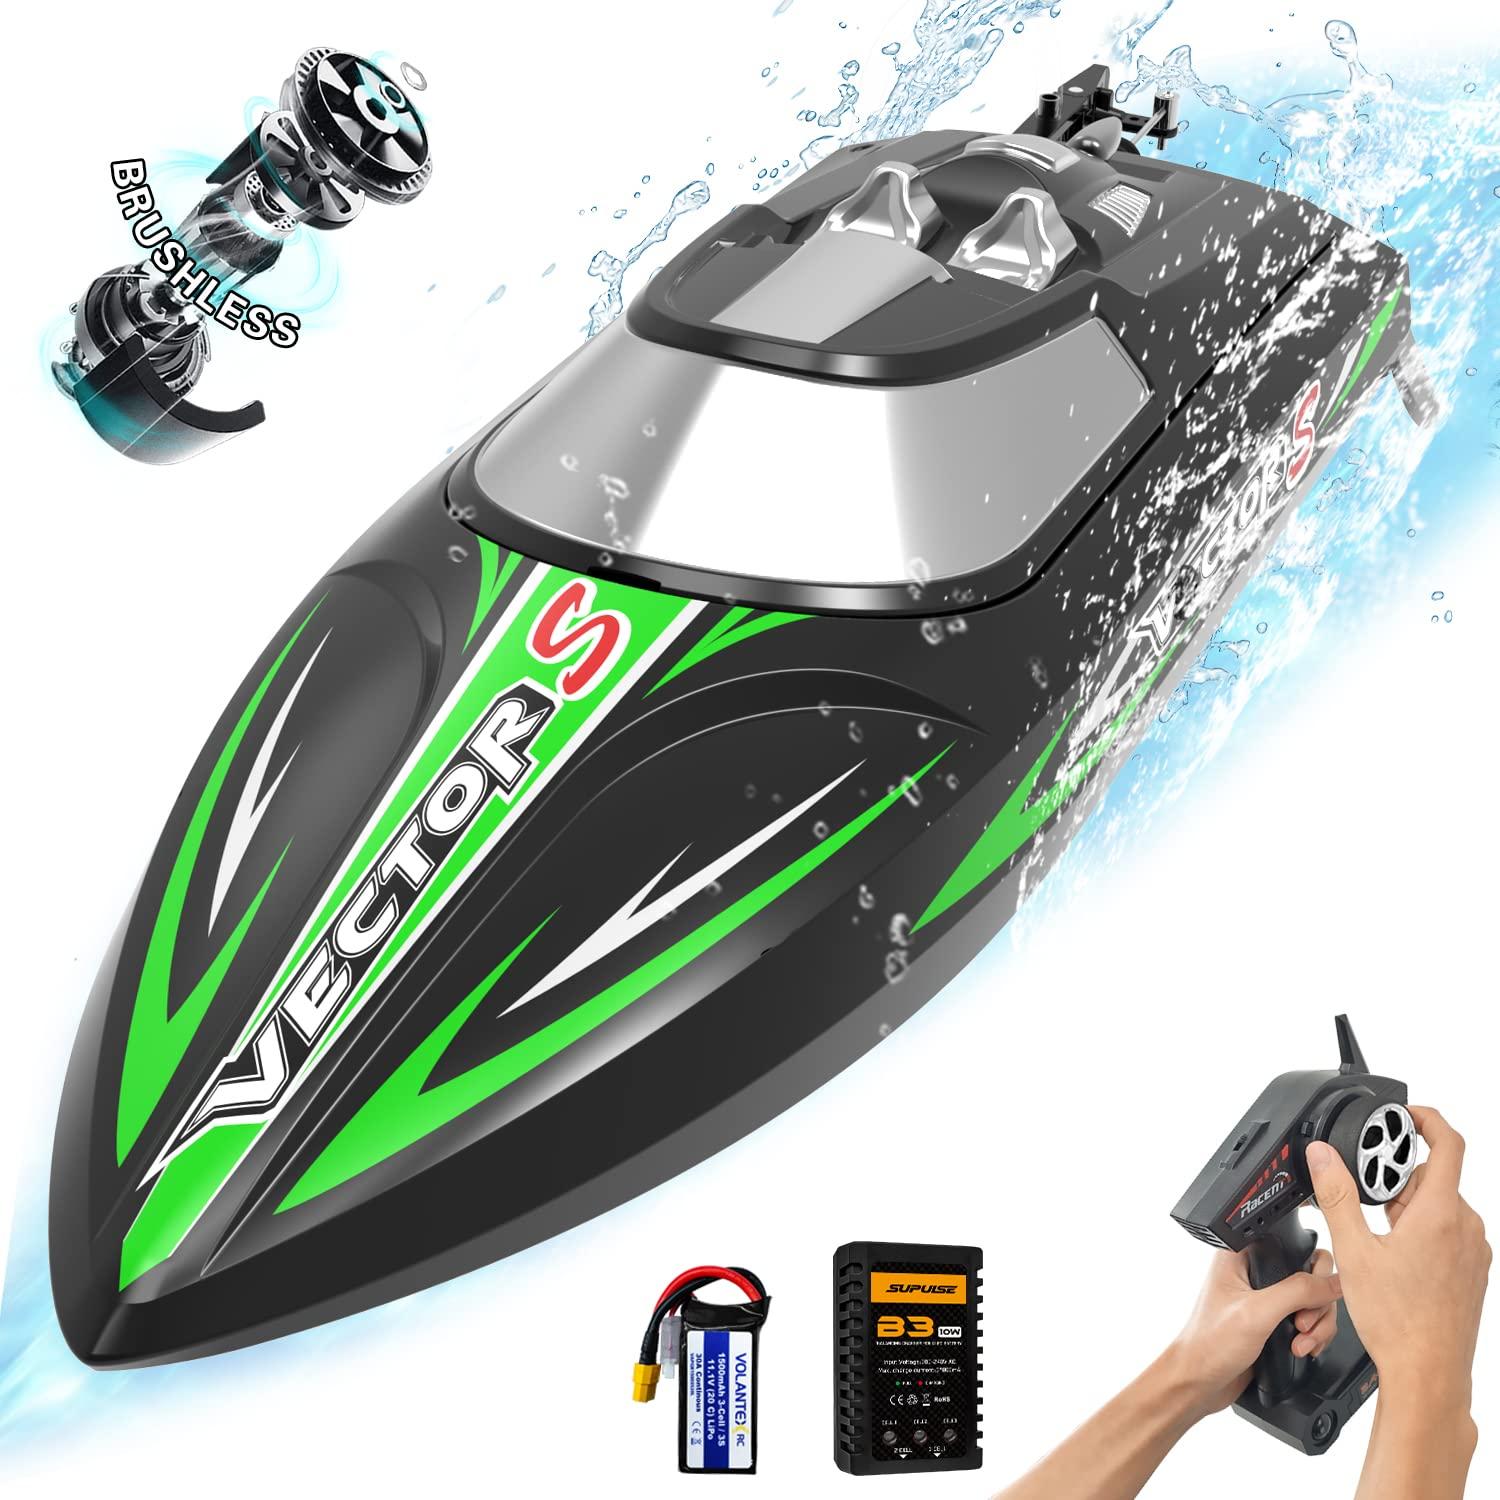 Darter King Rc Boat: The Darter King RC Boat: A Must-Have for Boating Enthusiasts!